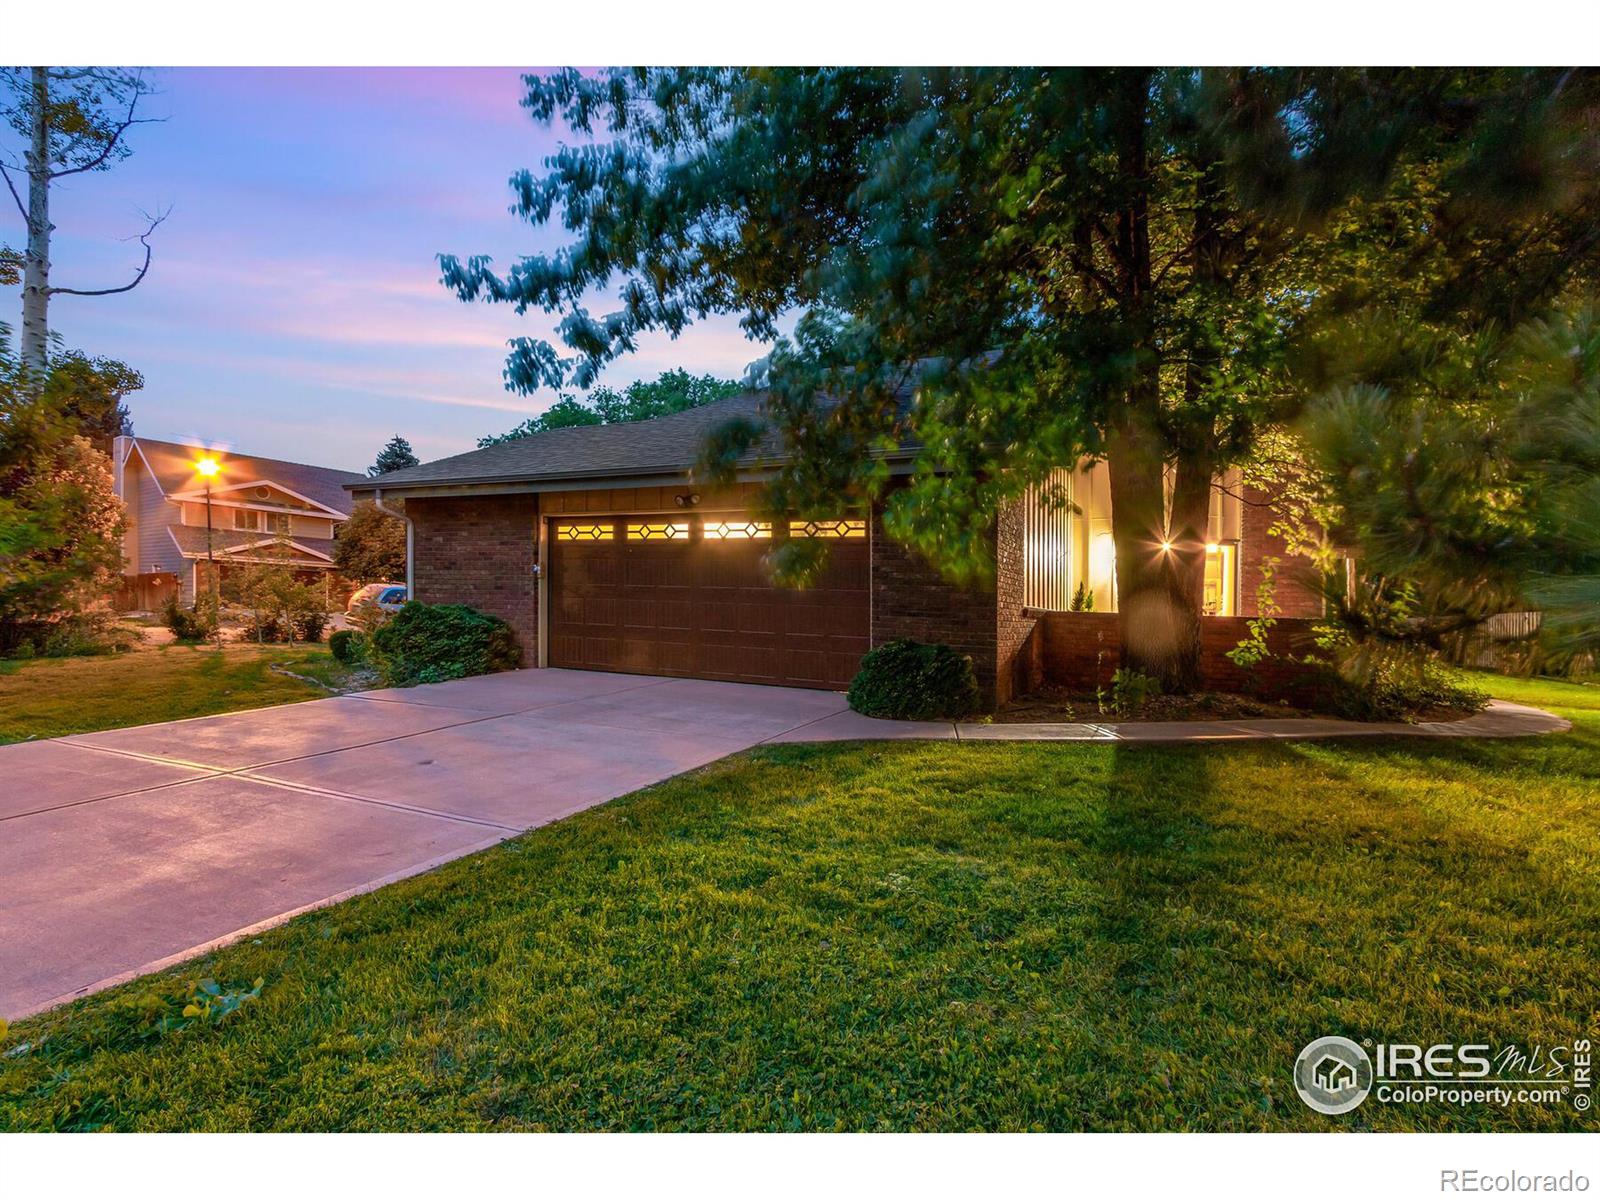 1749  Waterford Lane, fort collins MLS: 123456789995294 Beds: 4 Baths: 4 Price: $679,000